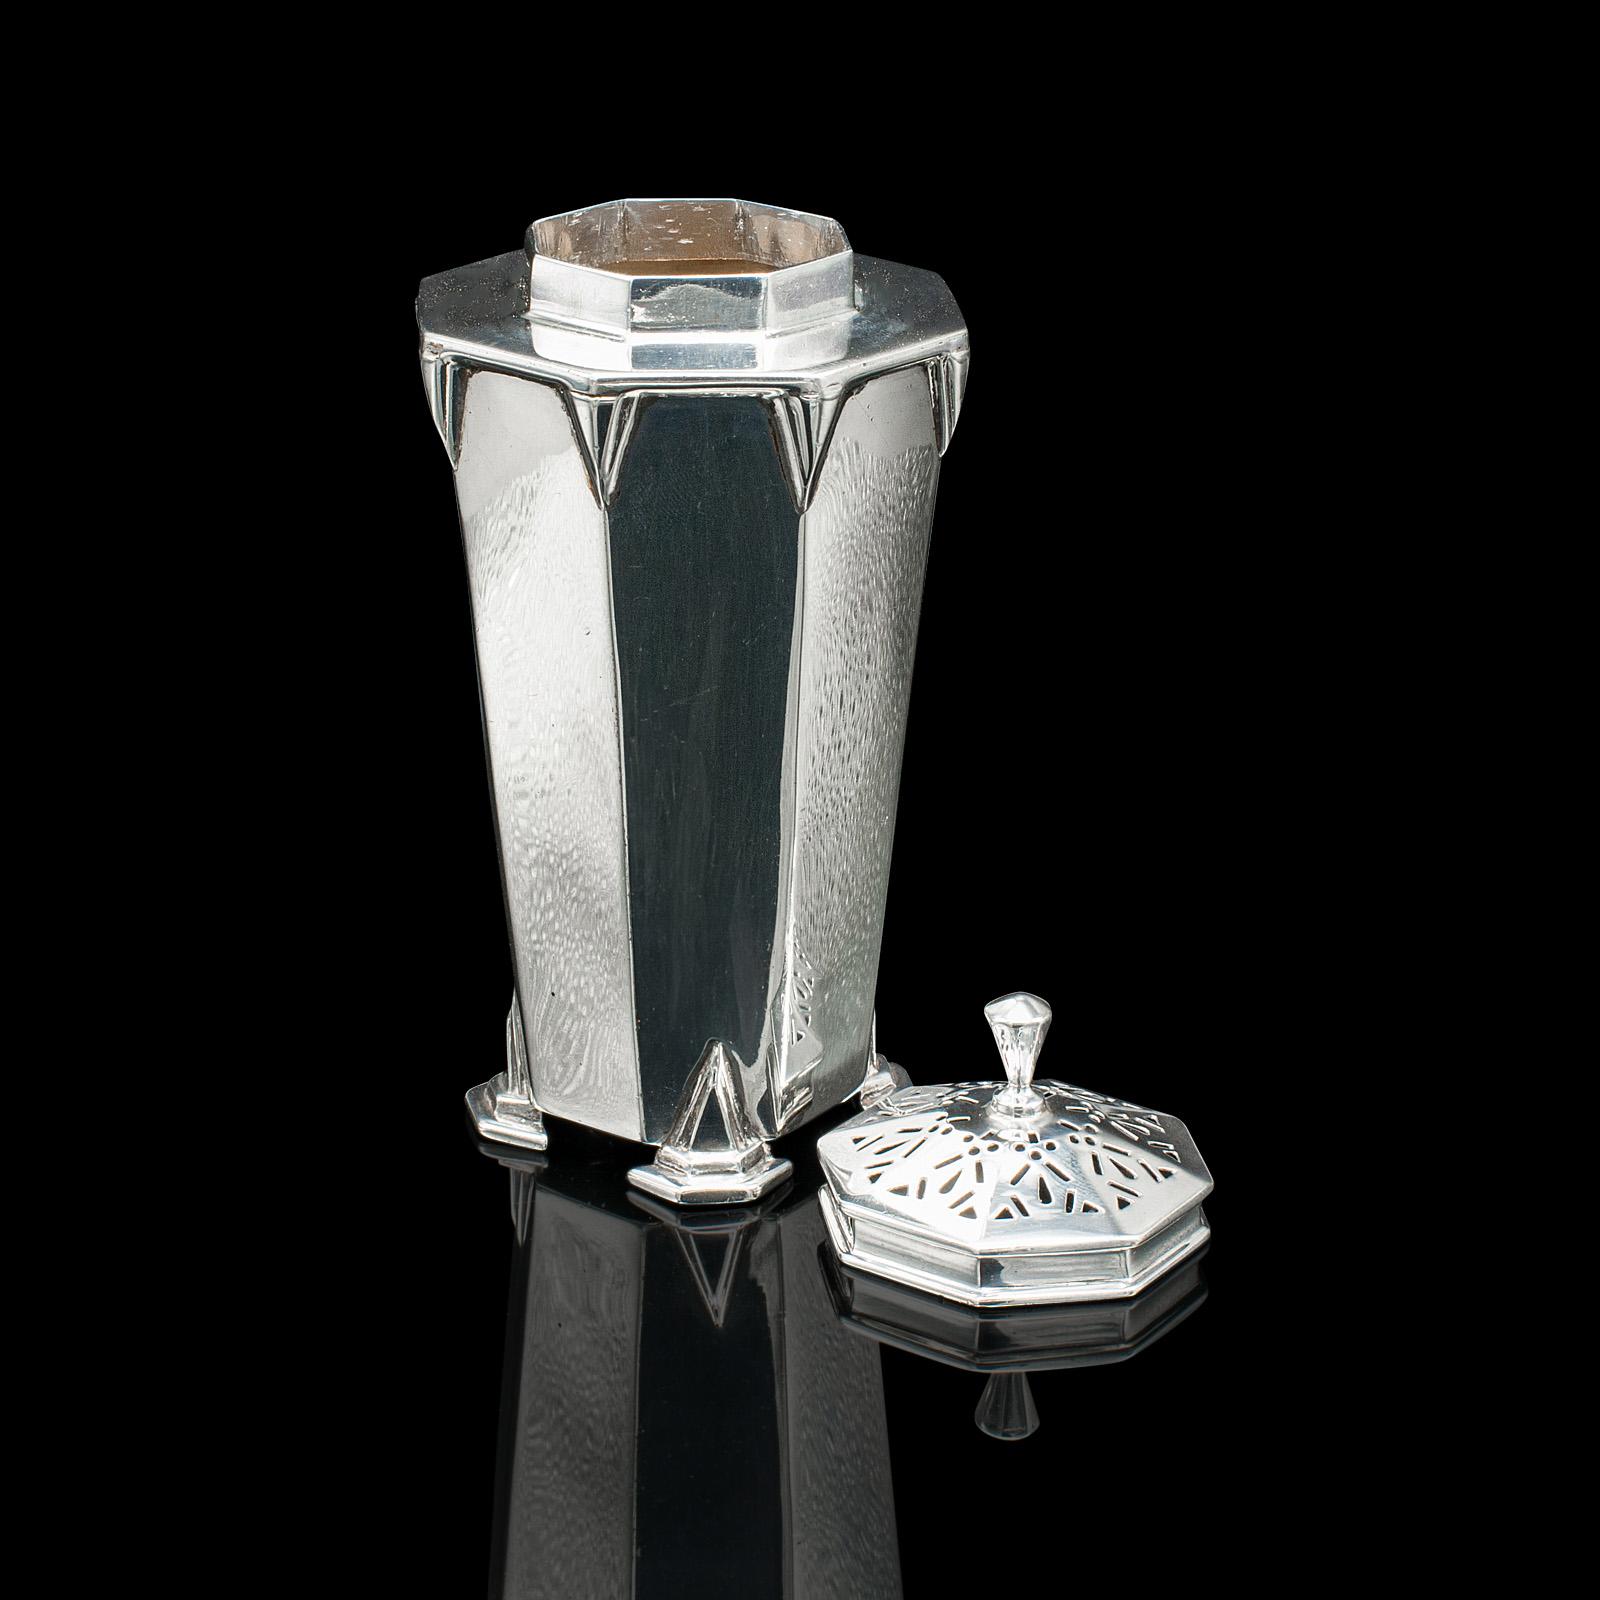 This is a vintage sugar caster. An English, sterling silver shaker in Art Deco taste, hallmarked 1933.

Fascinating Art Deco silverware, with a fine appearance
Displays a desirable aged patina and in good order
Sterling silver presents great